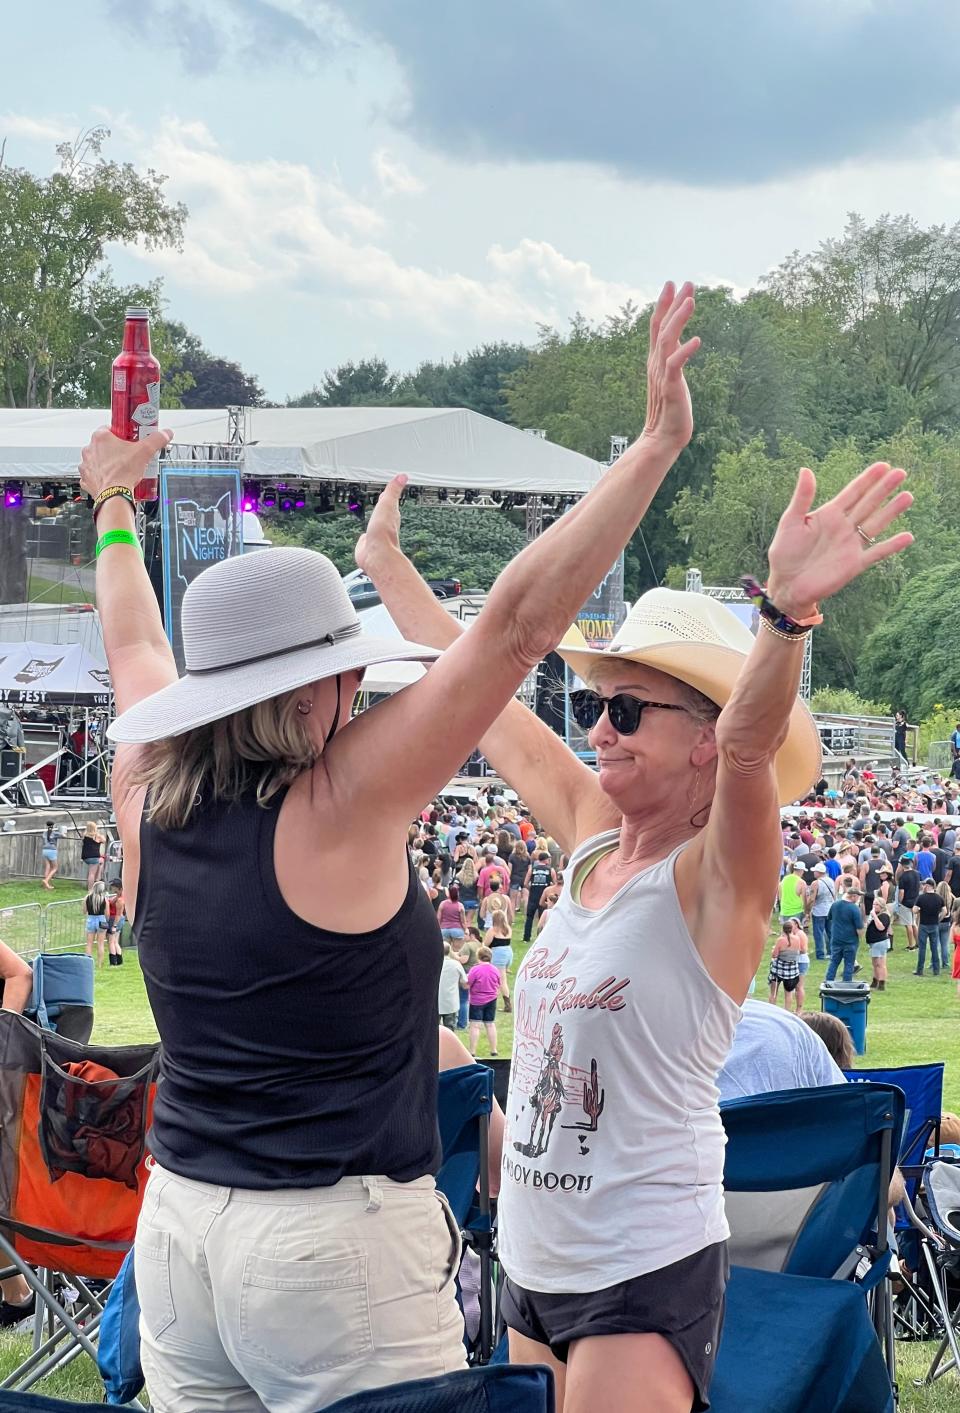 Country music fans enjoy the Neon Nights music festival on Friday. The event continues Saturday at Clay's Resort Jellystone Park with Wynonna Judd, Tim McGraw and other country music artists.